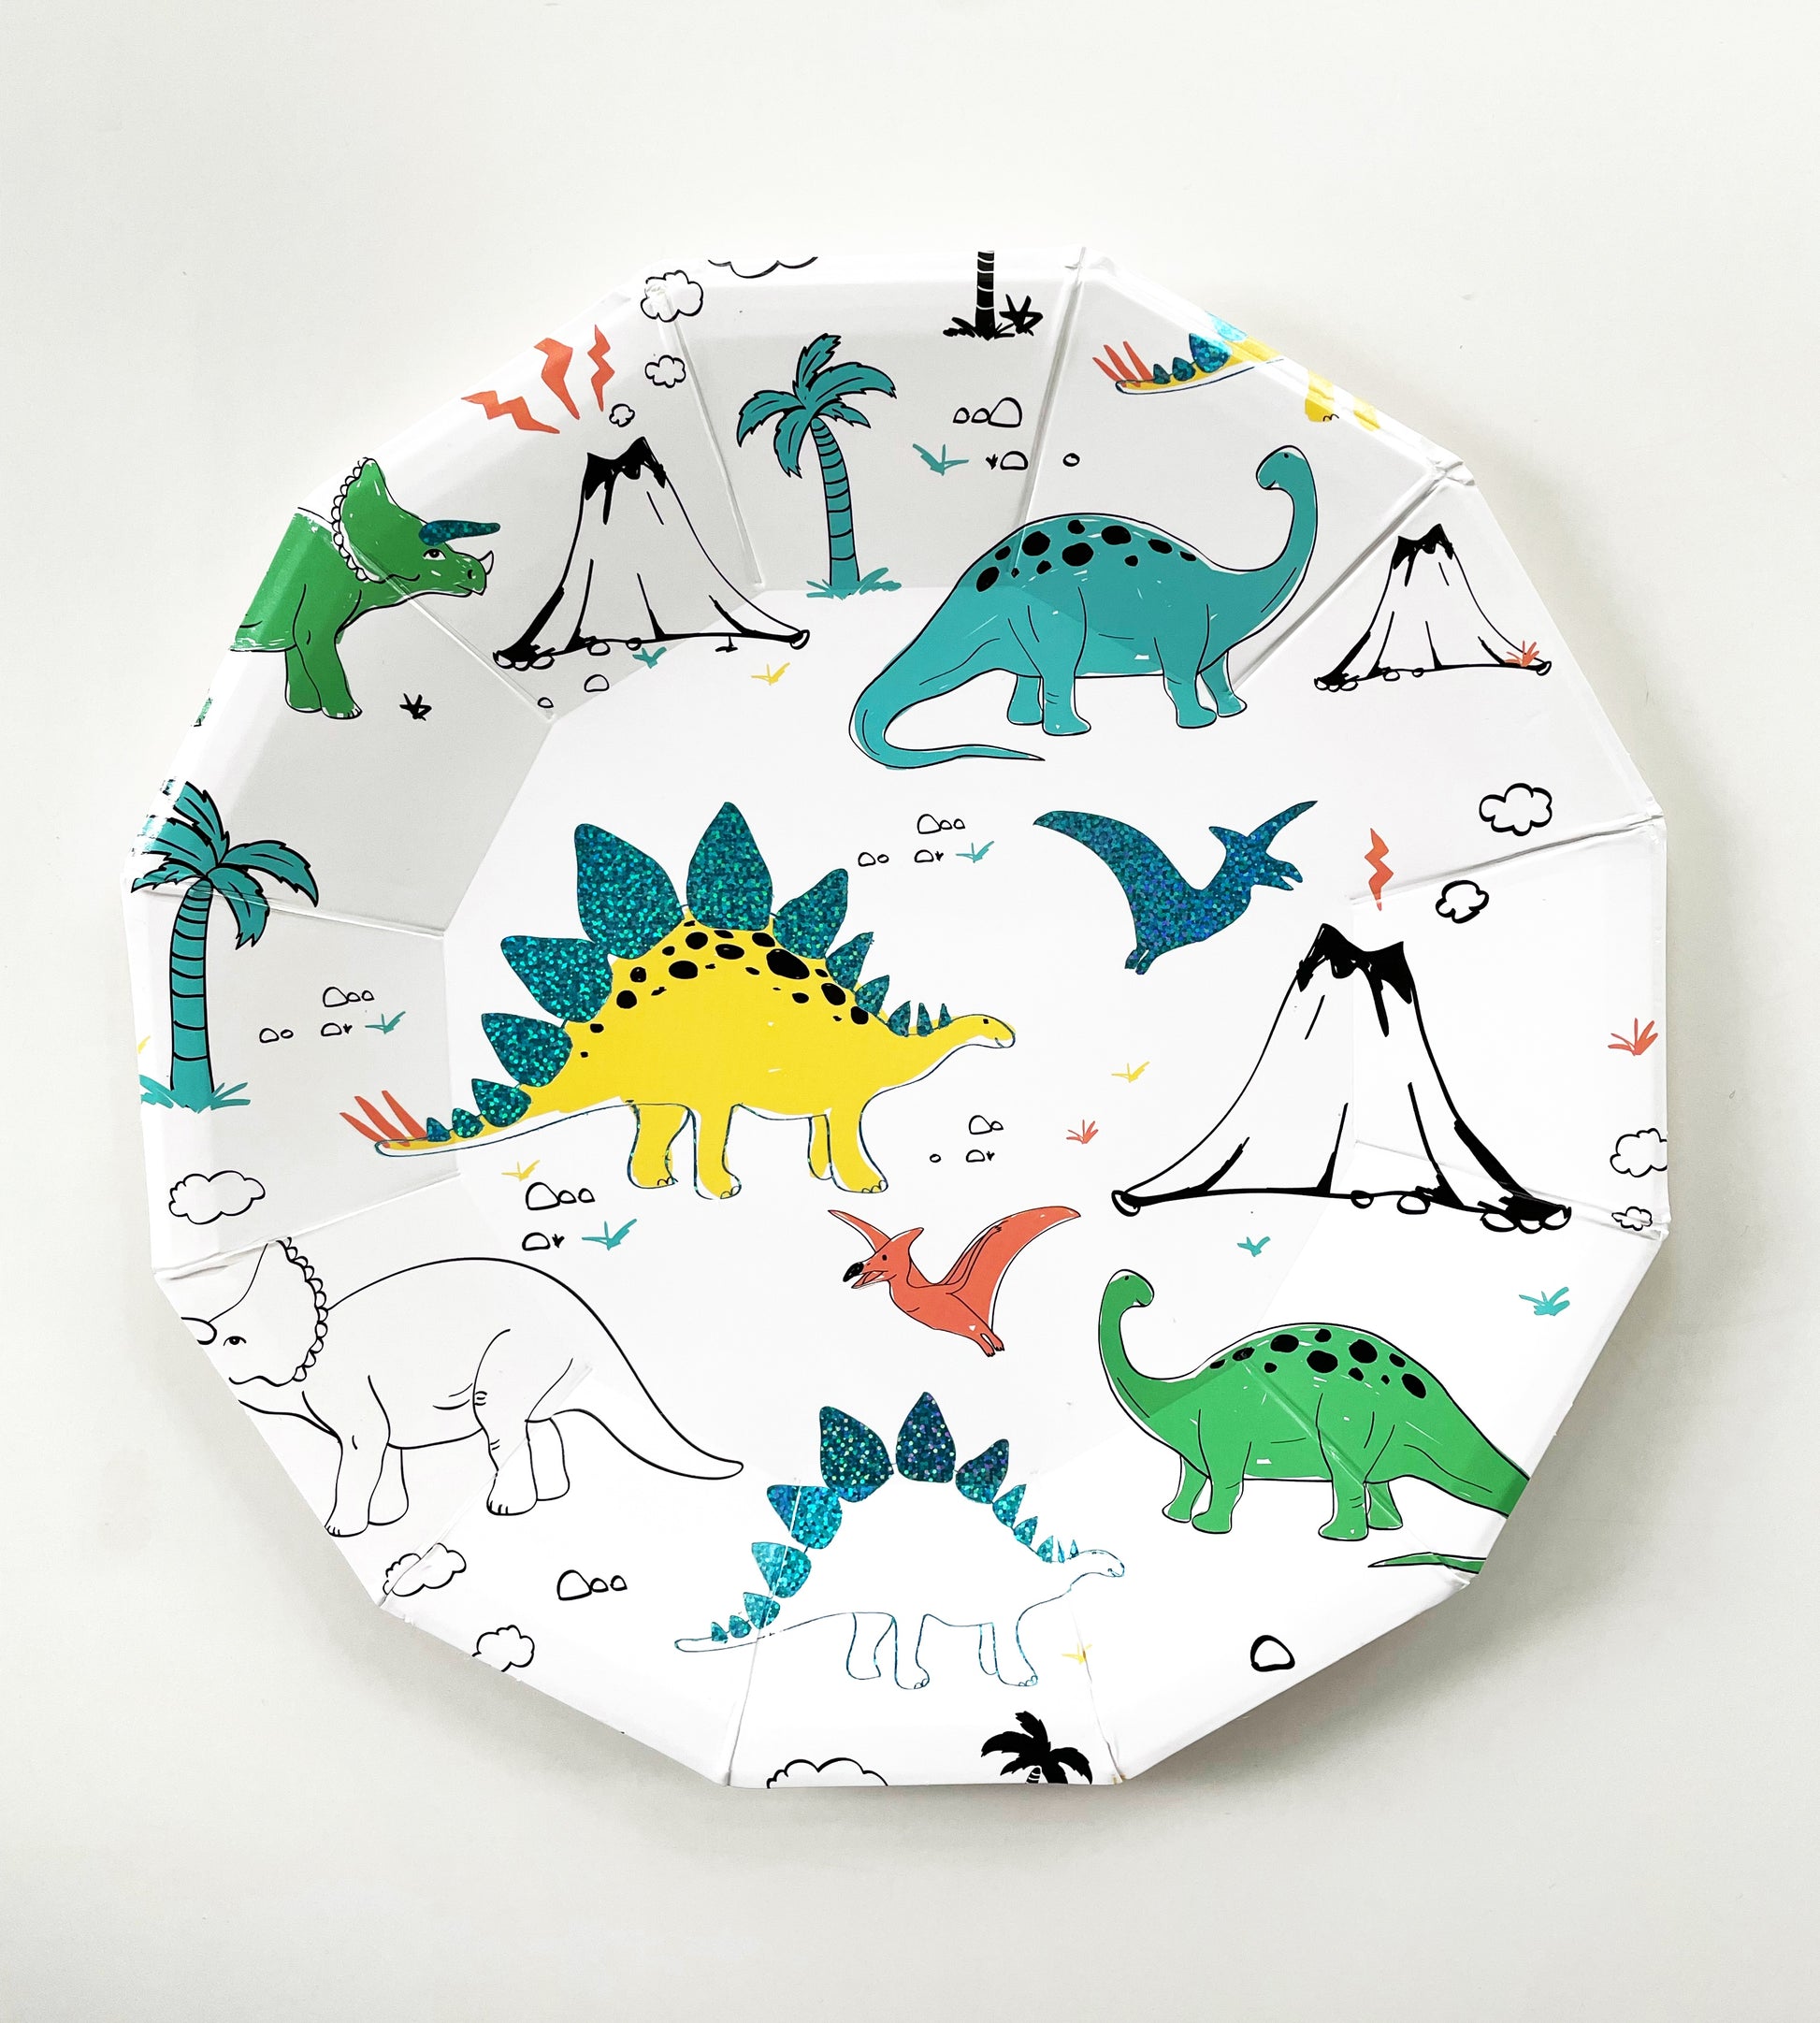 The large paper party plate dinosaur pattern features green, blue, yellow and red dinosaurs, volcanoes and palm trees. The party plates feature blue metallic elements, and are in the shape of a dodecagon.